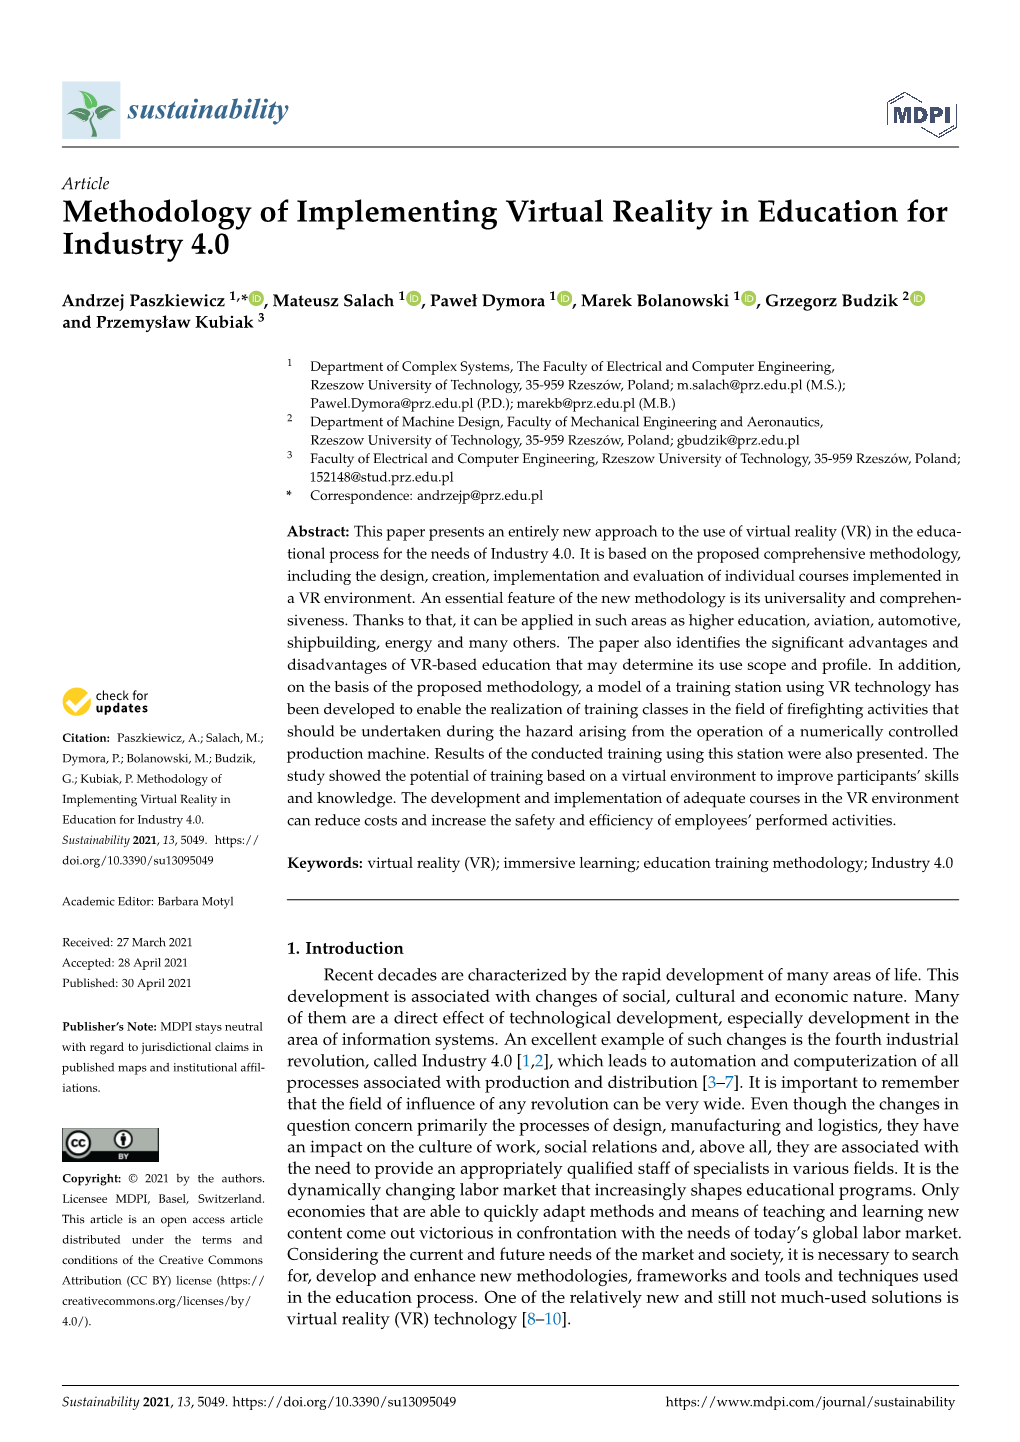 Methodology of Implementing Virtual Reality in Education for Industry 4.0